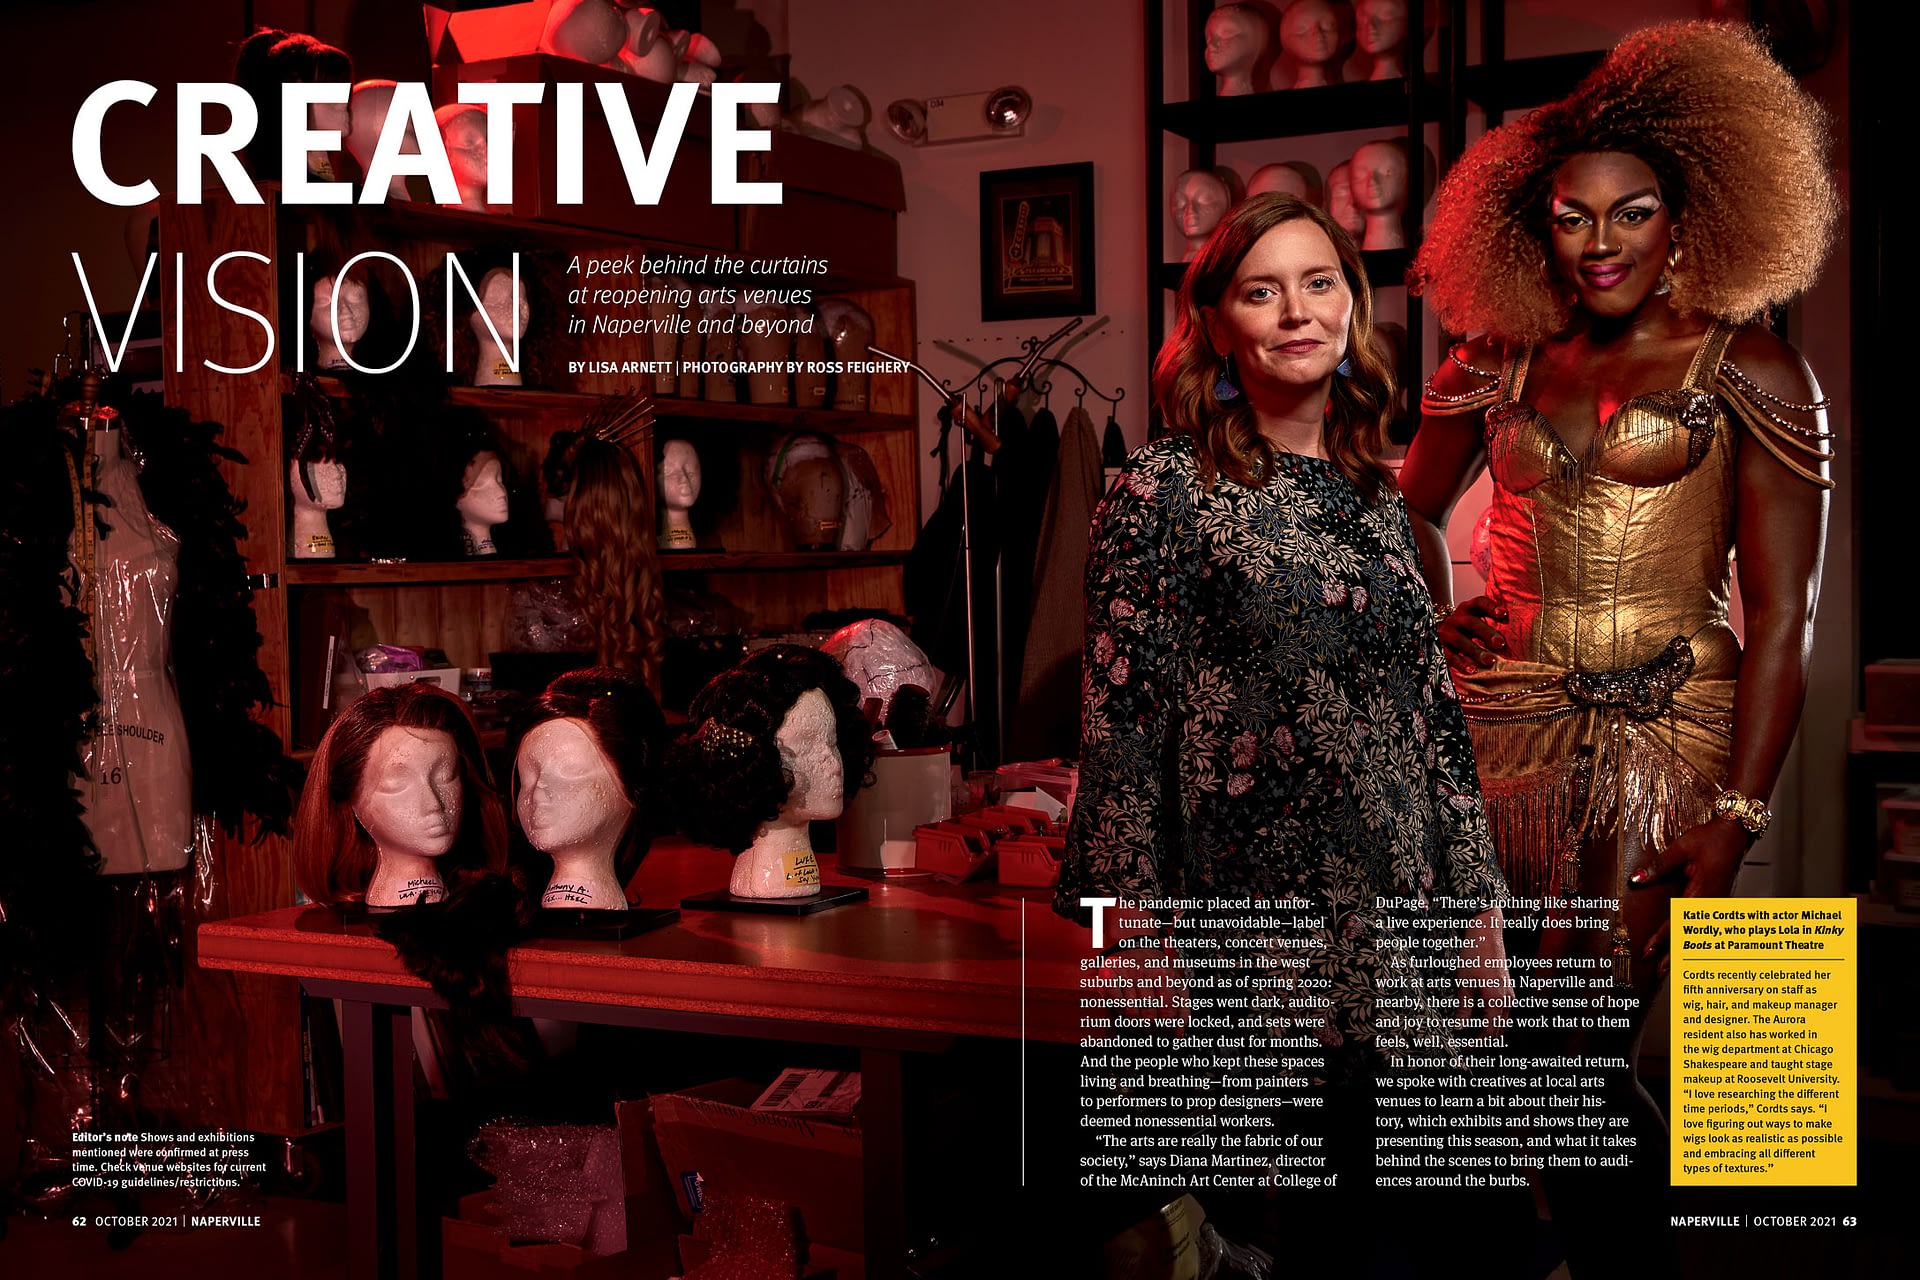 Oh, The Drama! for Naperville Magazine